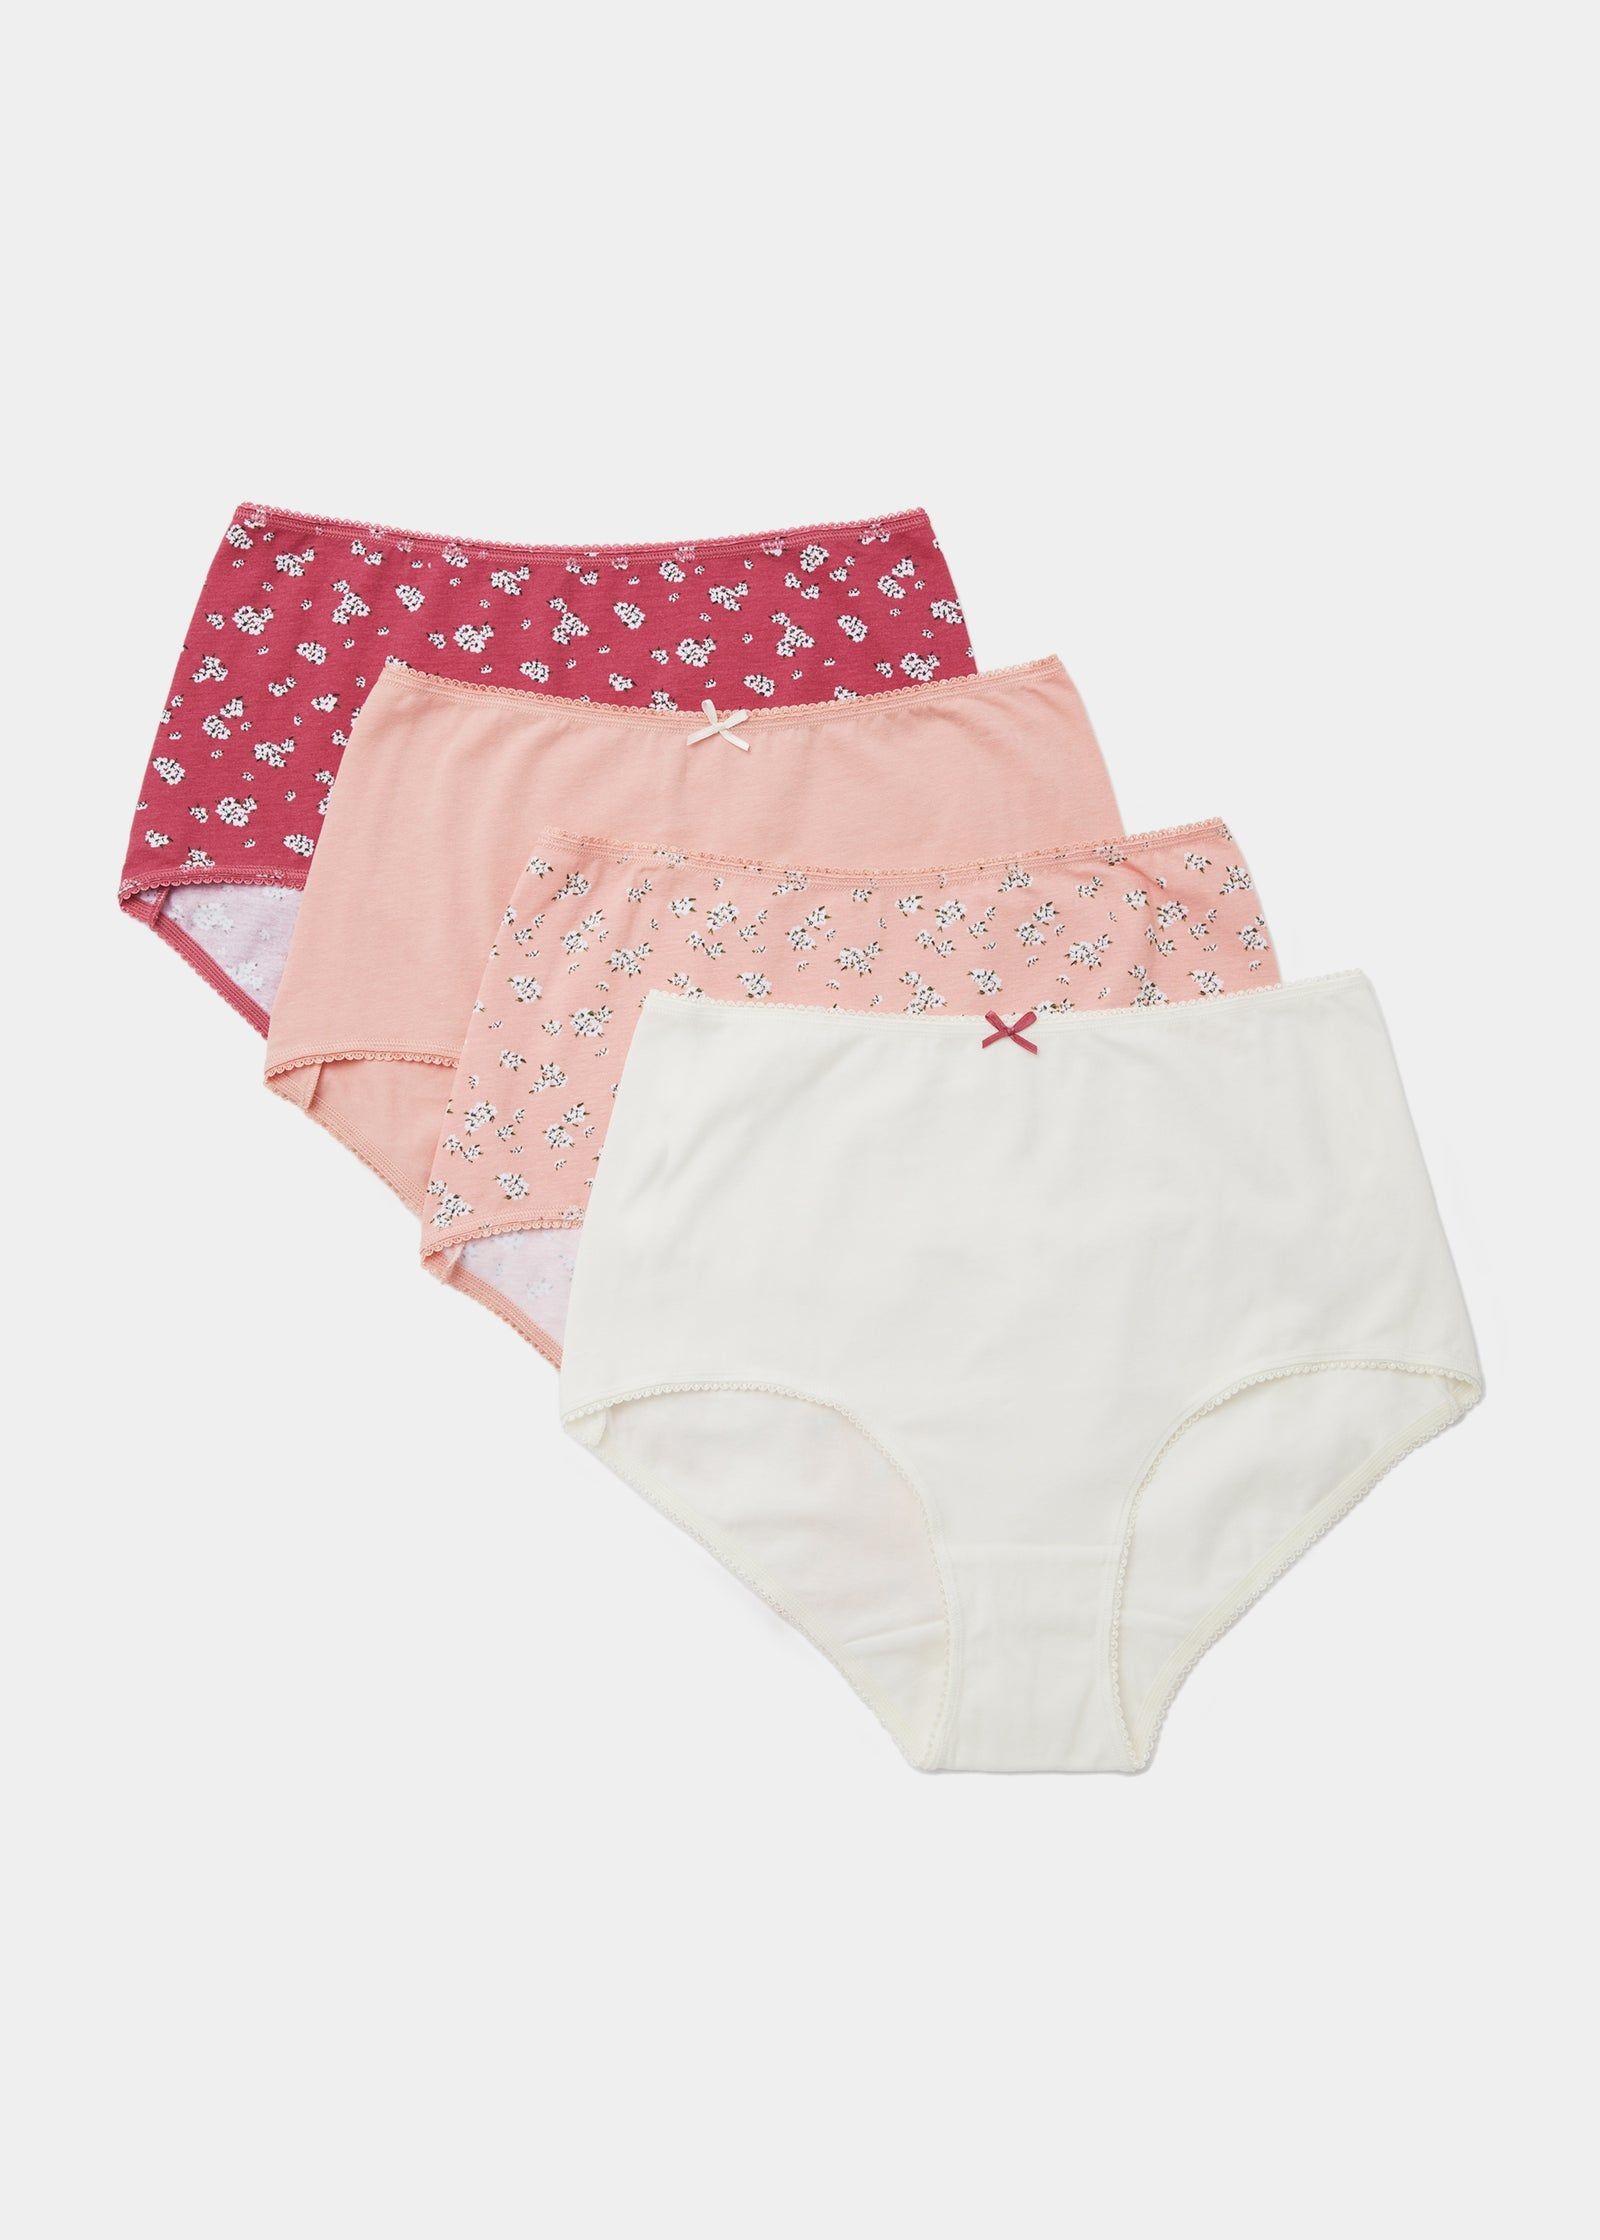 Buy 4 Pack Print Full Knickers Online in Bahrain from Matalan